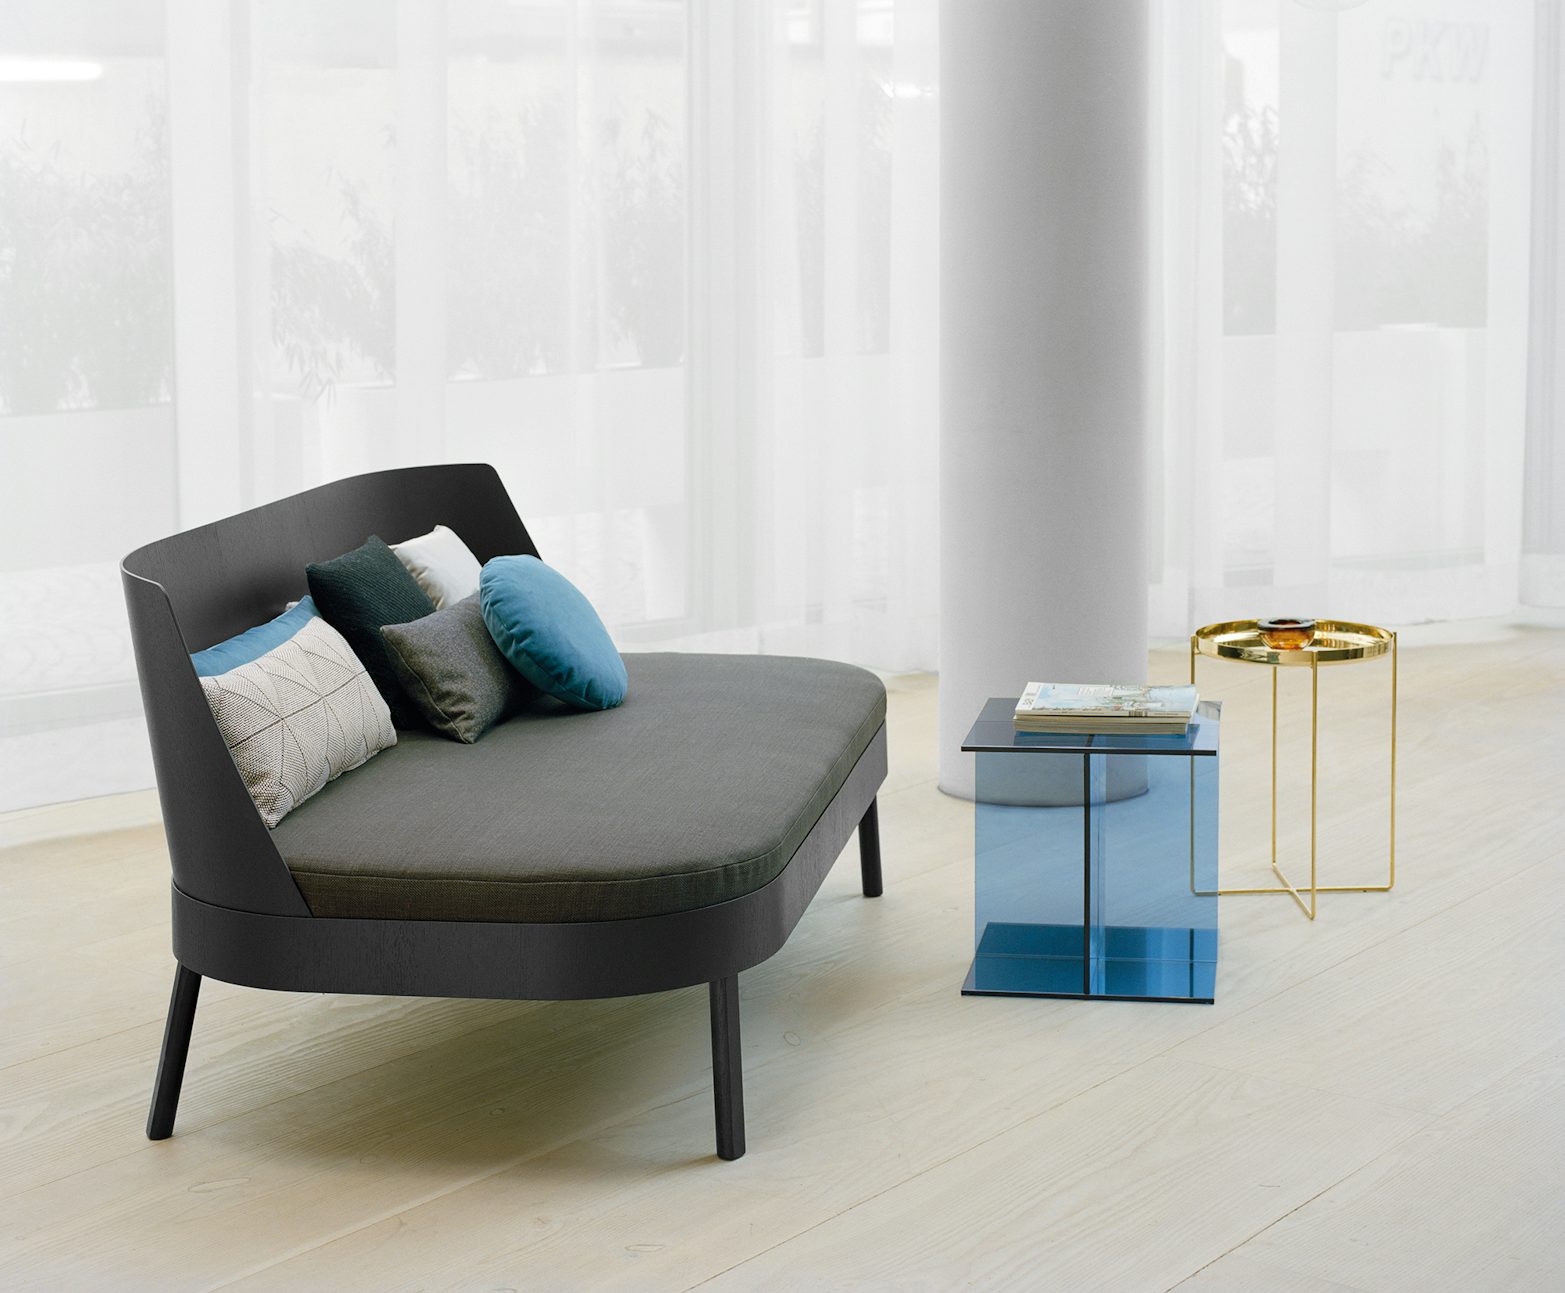 habibi side table by philipp mainzer for e15